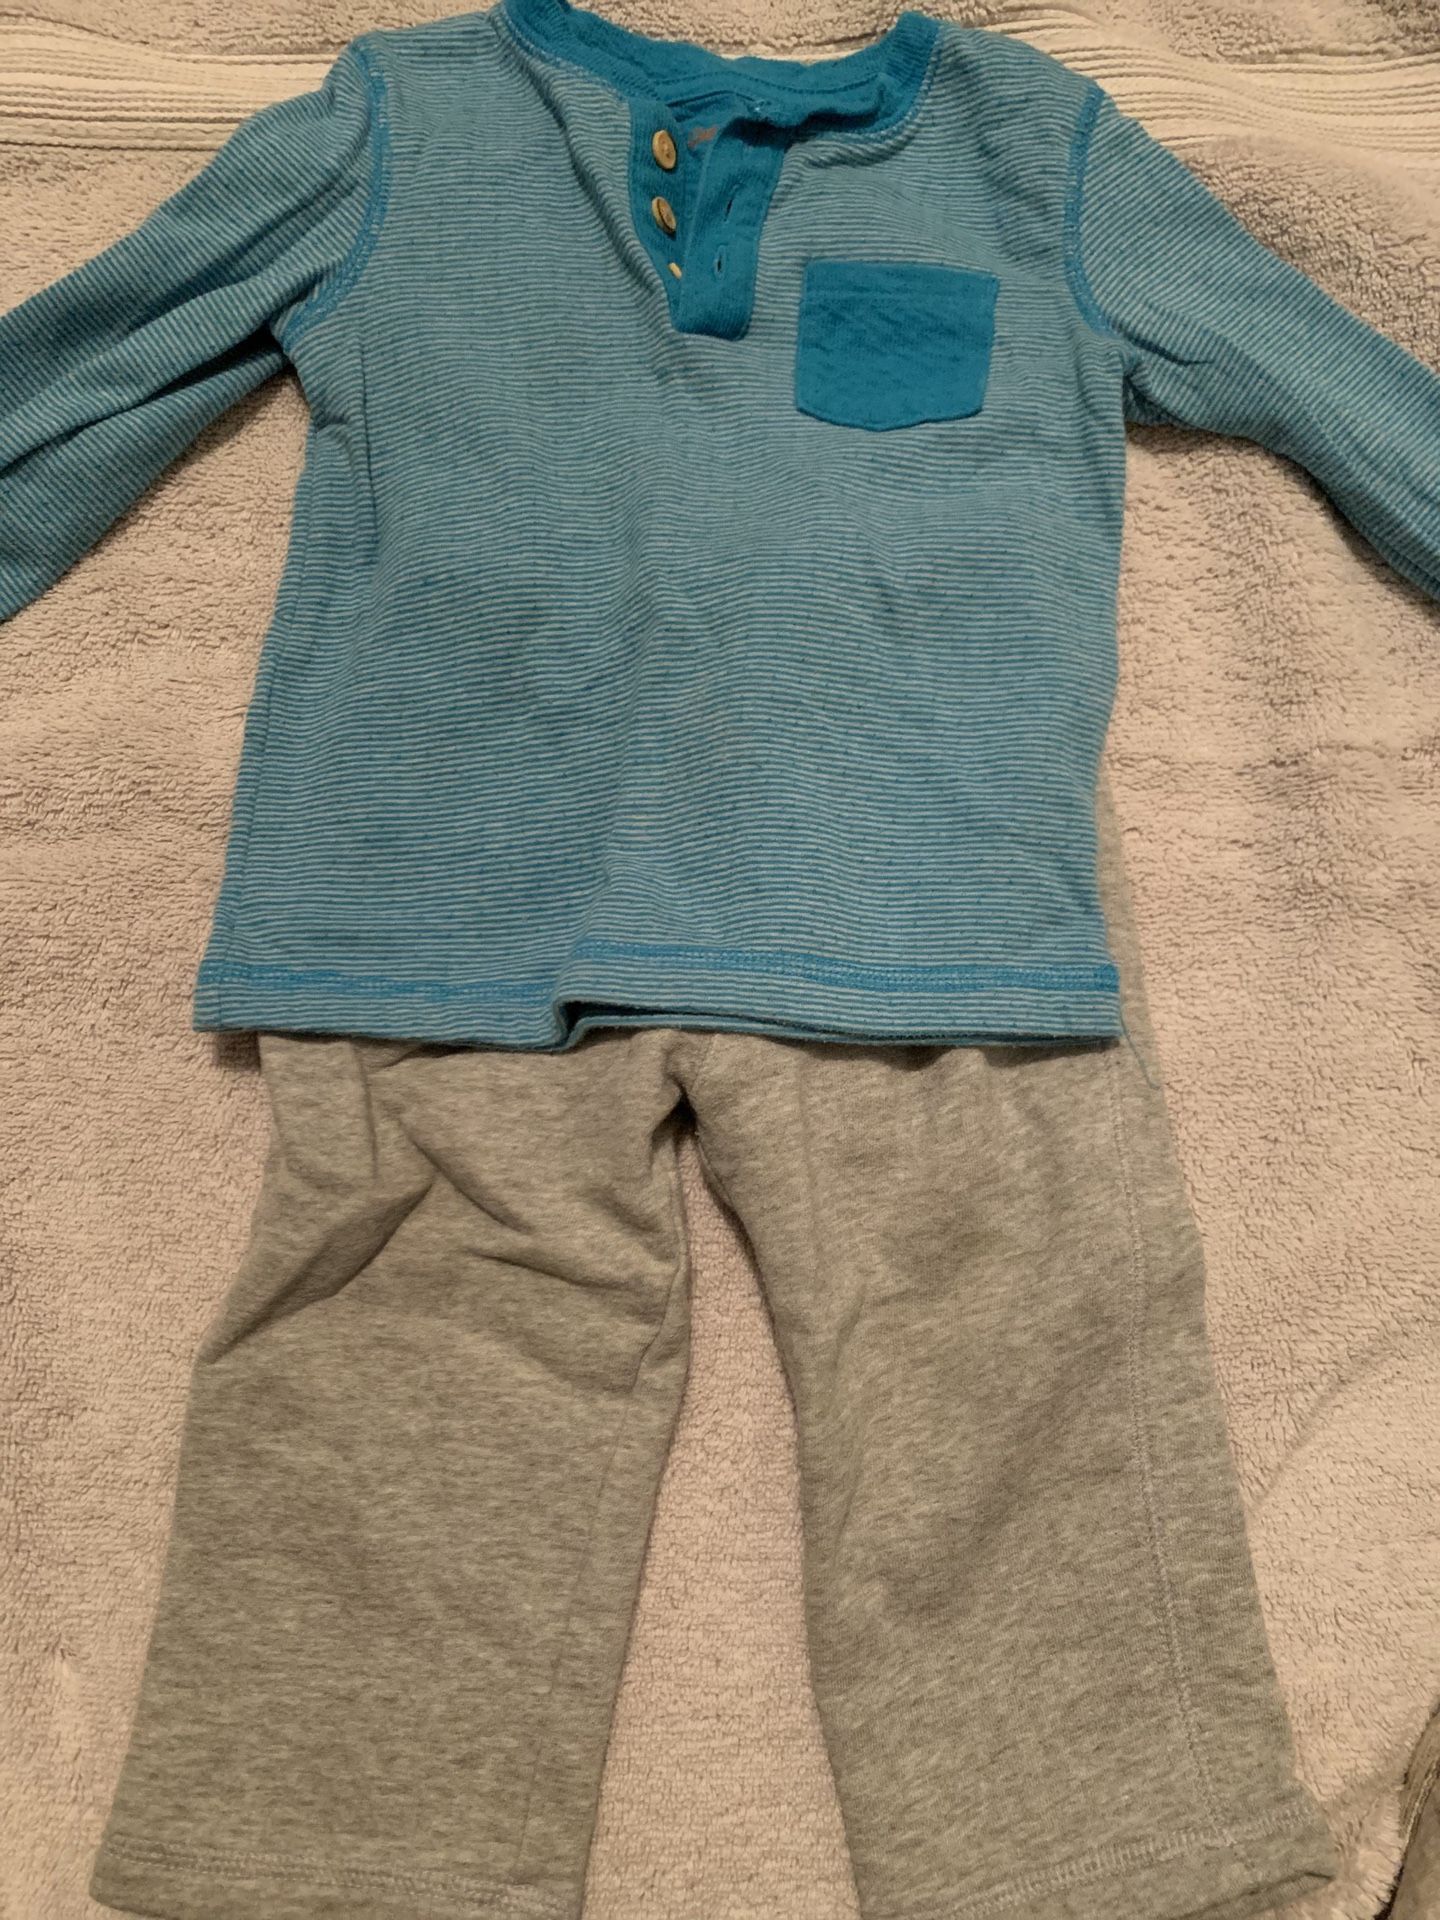 Cat & Jack 18 month outfit